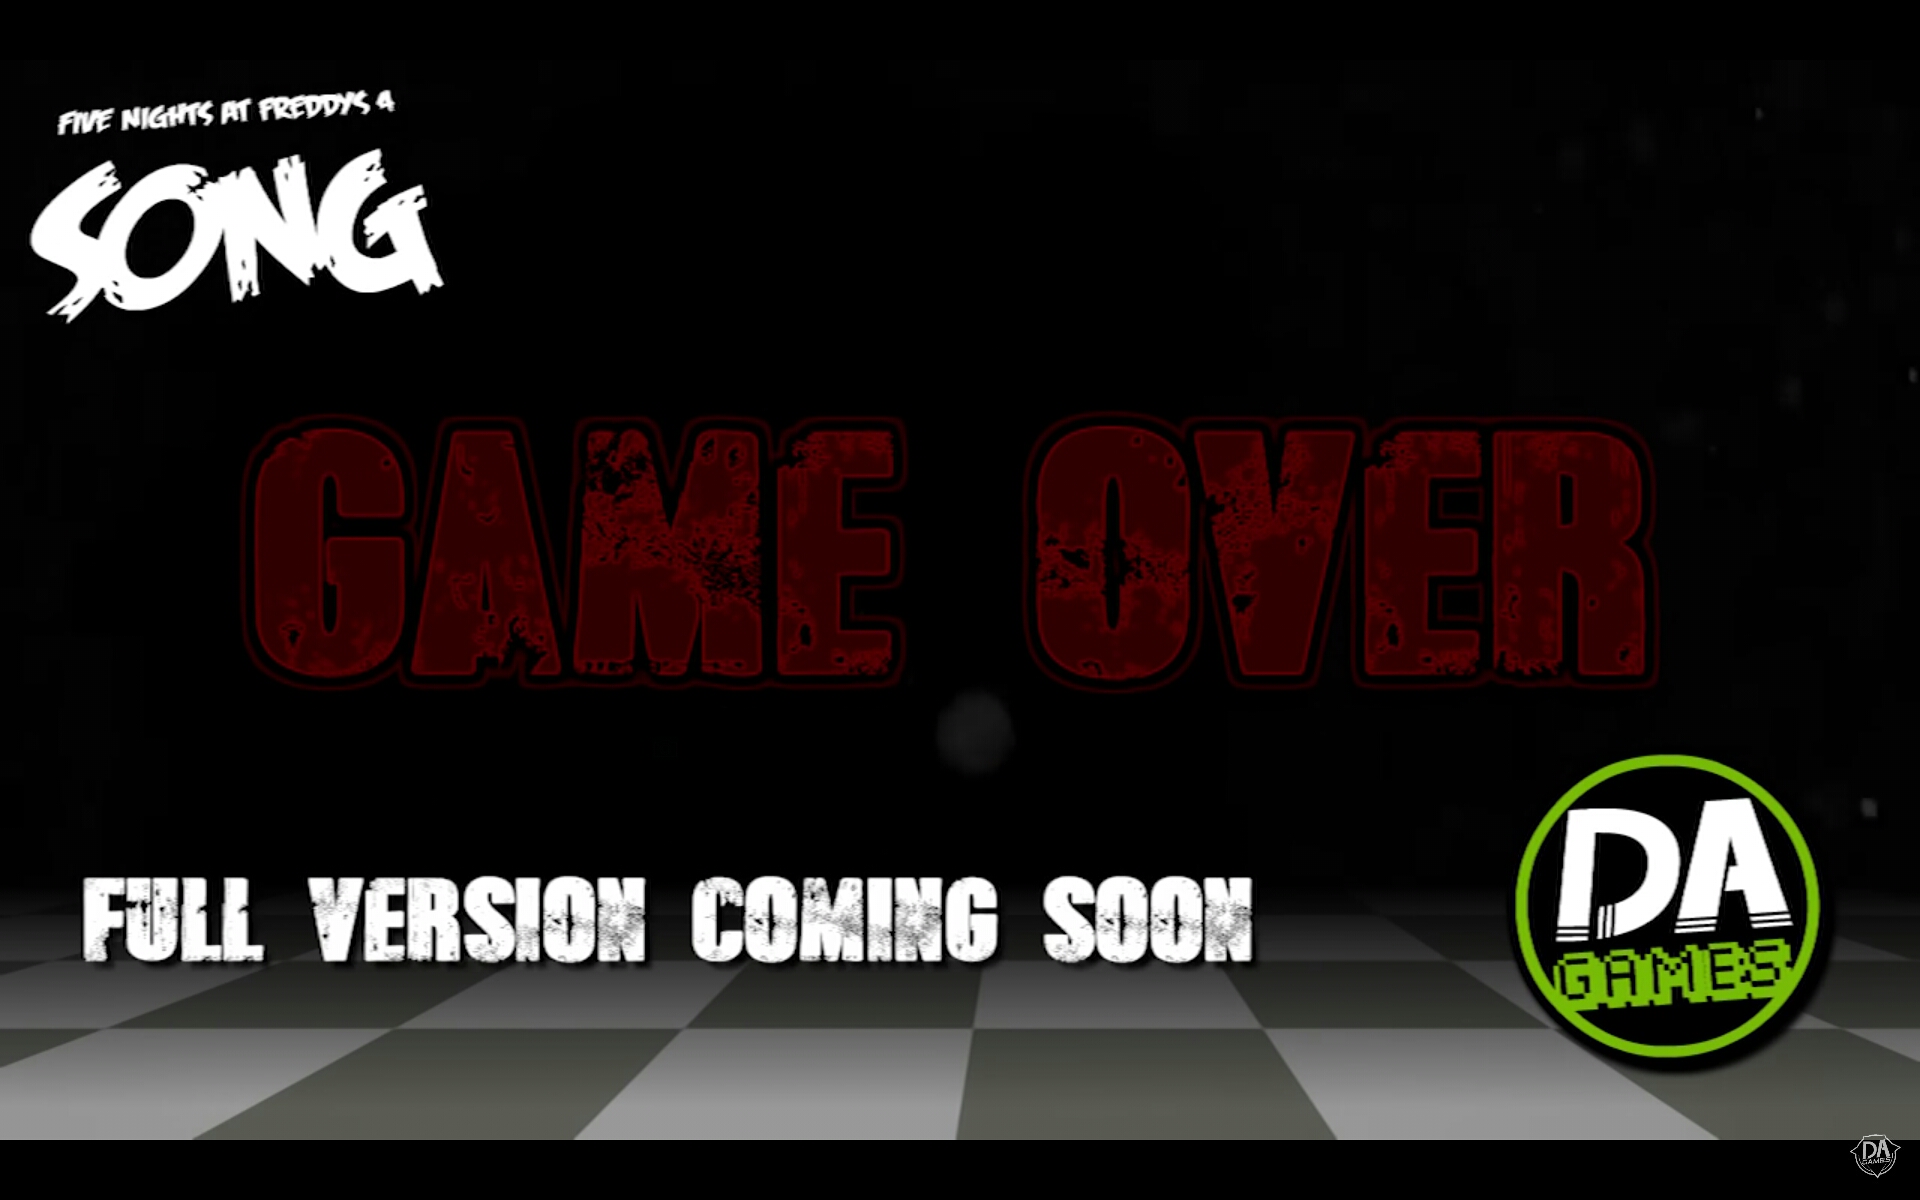 Need font for "Game Over" and "FULL VERSION COMING SOON"